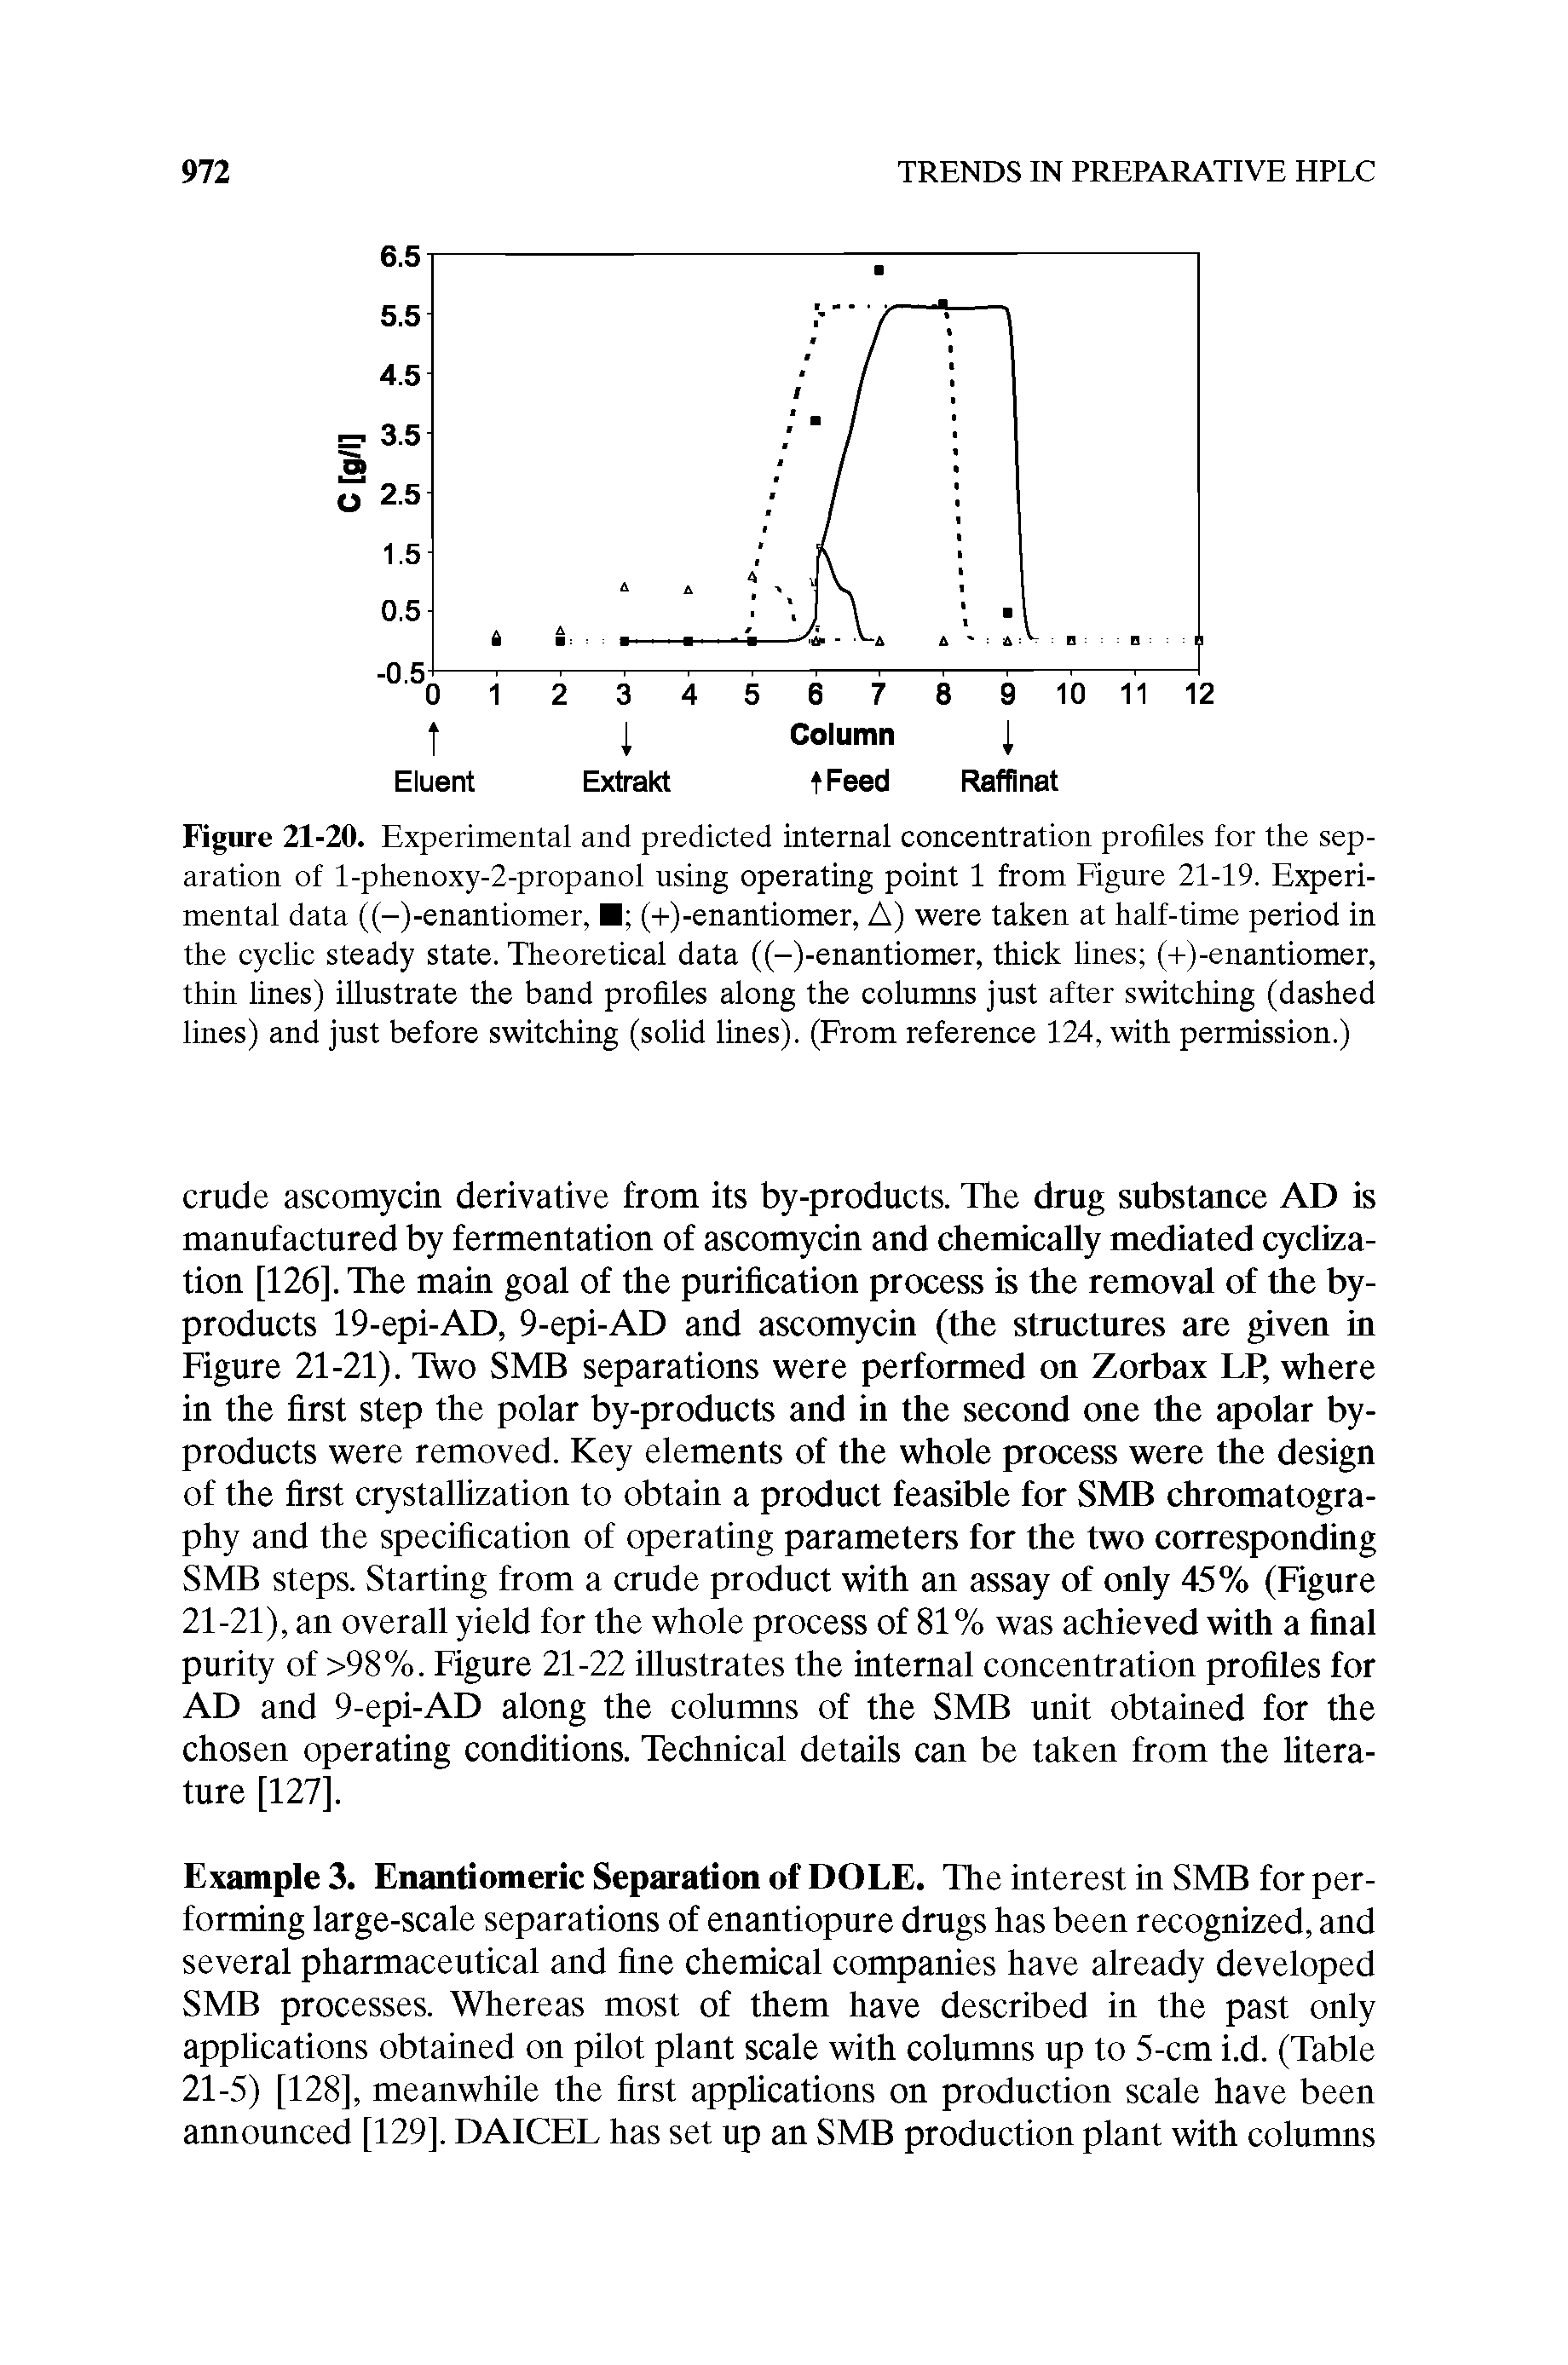 Figure 21-20. Experimental and predicted internal concentration profiles for the separation of l-phenoxy-2-propanoi using operating point 1 from Figure 21-19. Experimental data ((-)-enantiomer, (-I-)-enantiomer, A) were taken at half-time period in the cyclic steady state. Theoretical data ((-)-enantiomer, thick lines (-t)-enantiomer, thin lines) illustrate the band profiles along the columns just after switching (dashed lines) and just before switching (solid lines). (From reference 124, with permission.)...